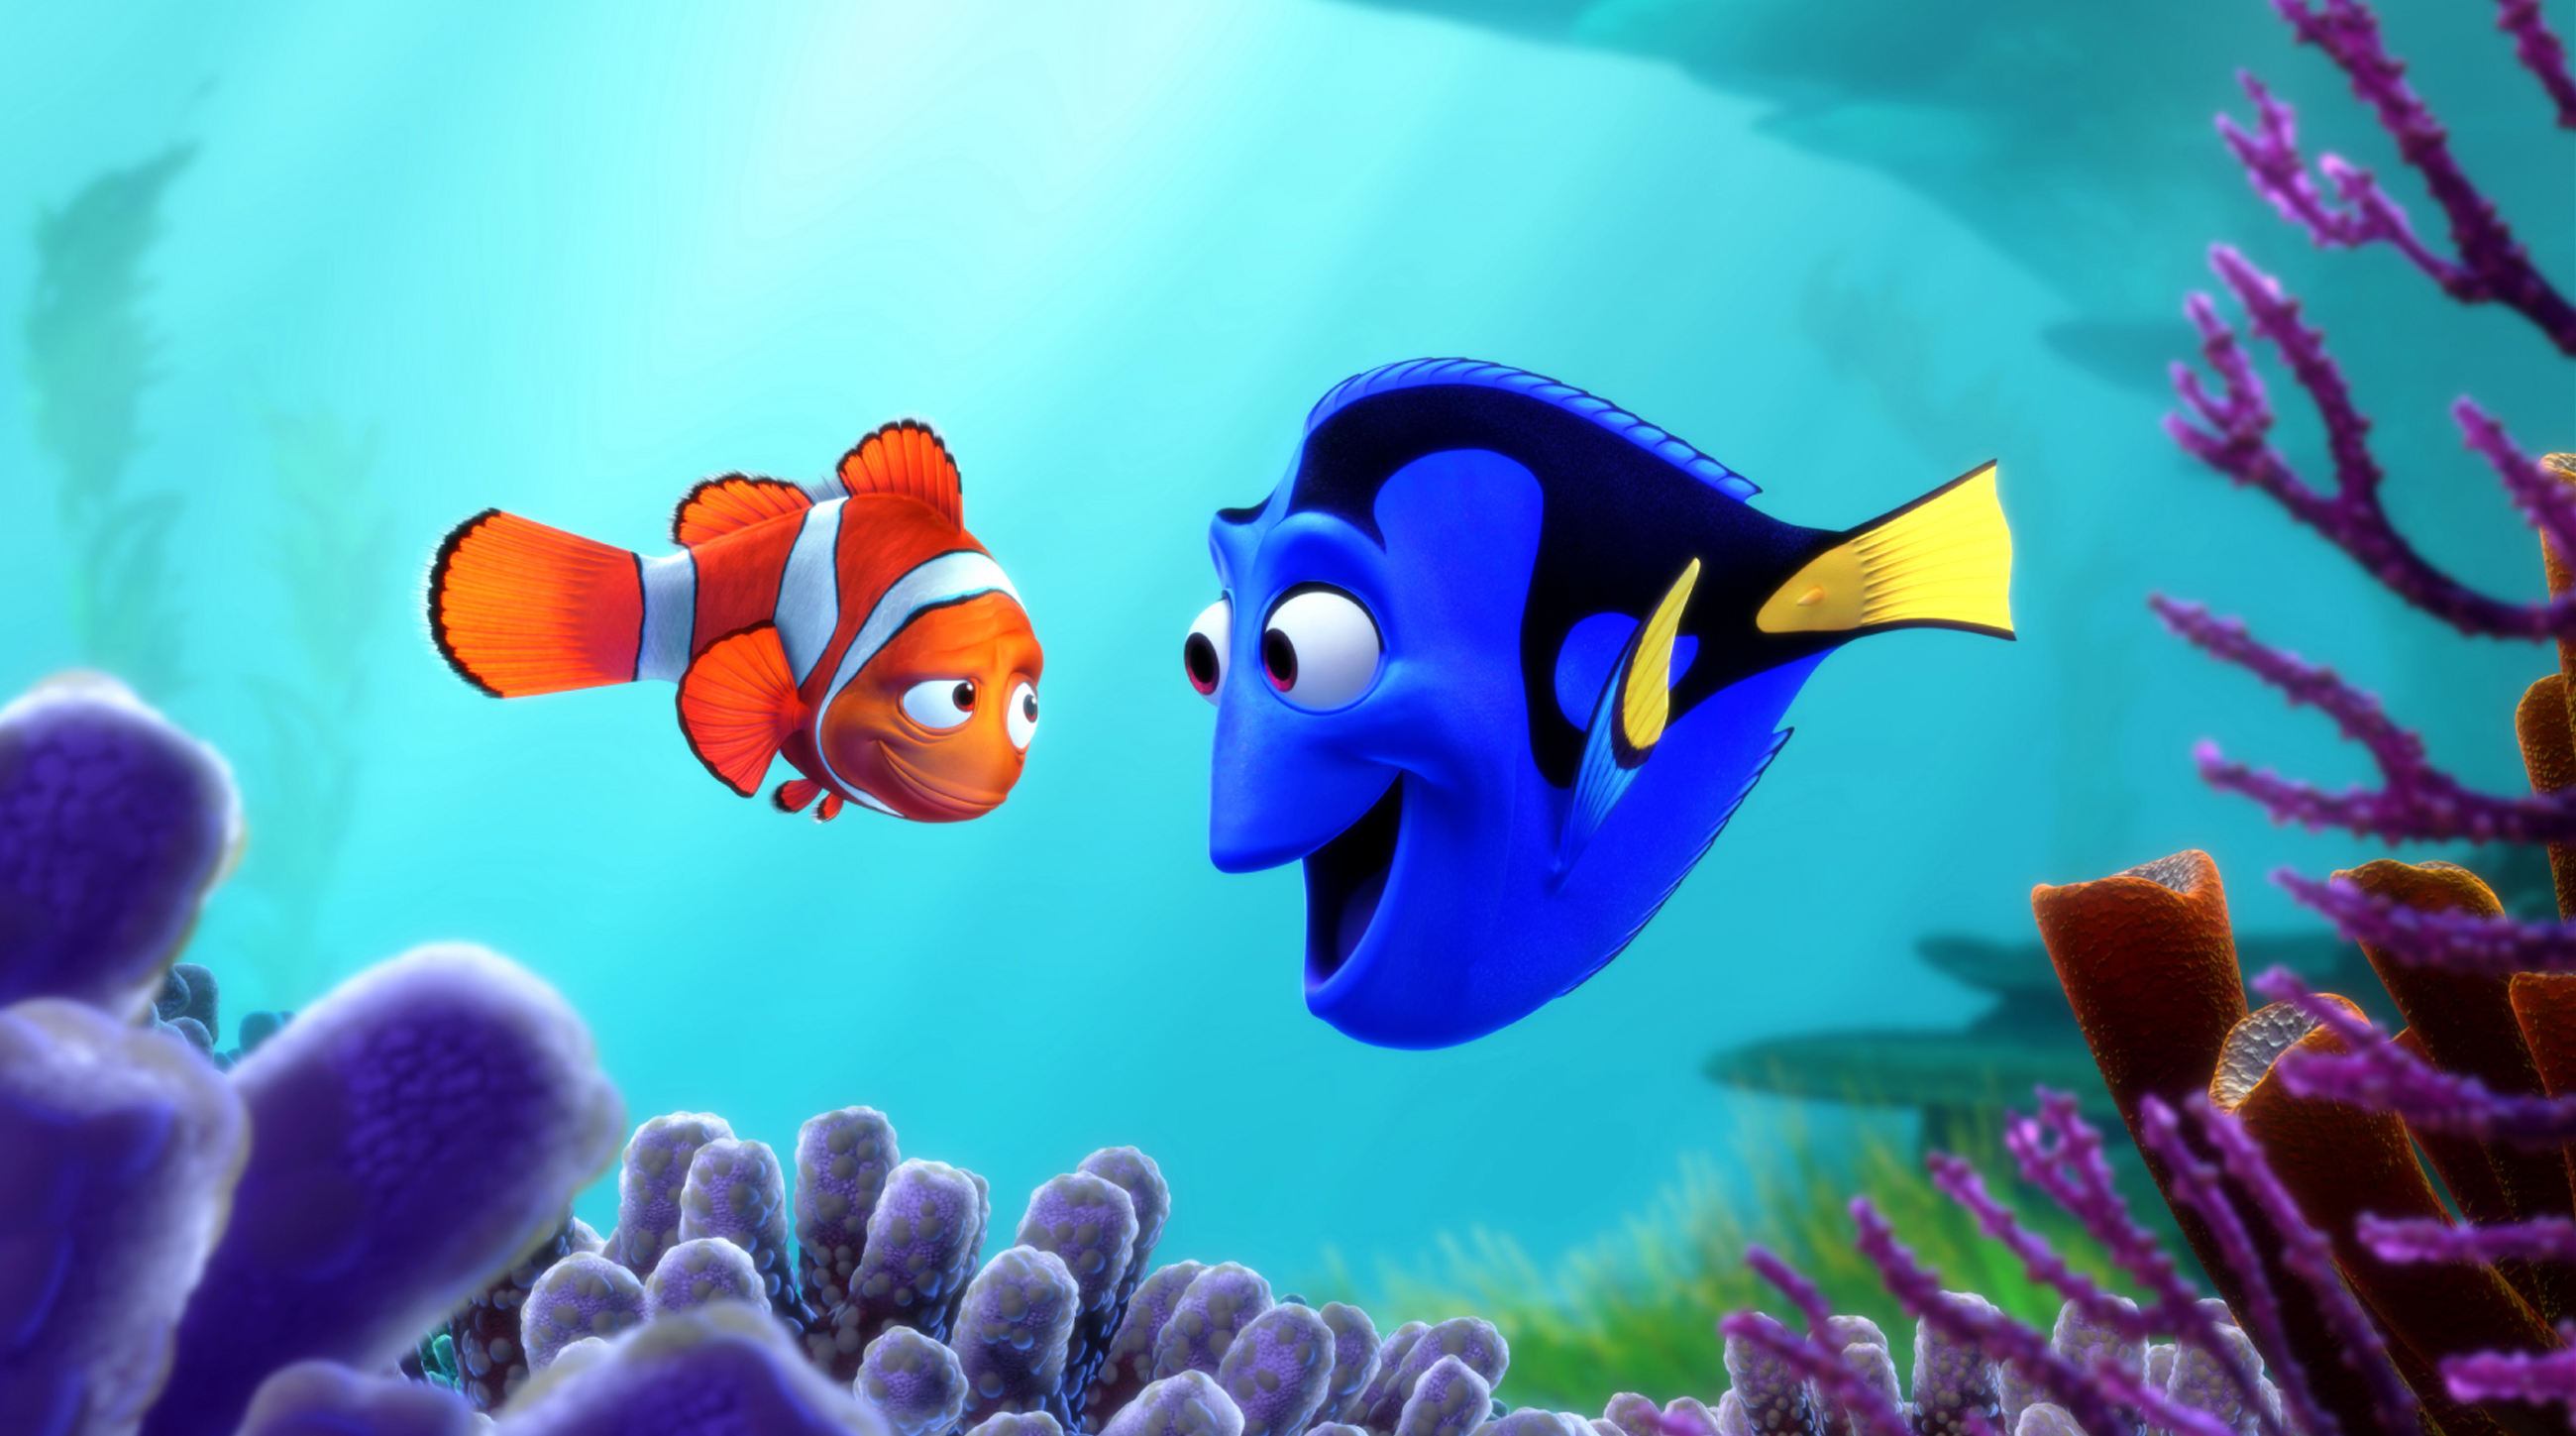 Finding nemo mp4 movie free download in hindi